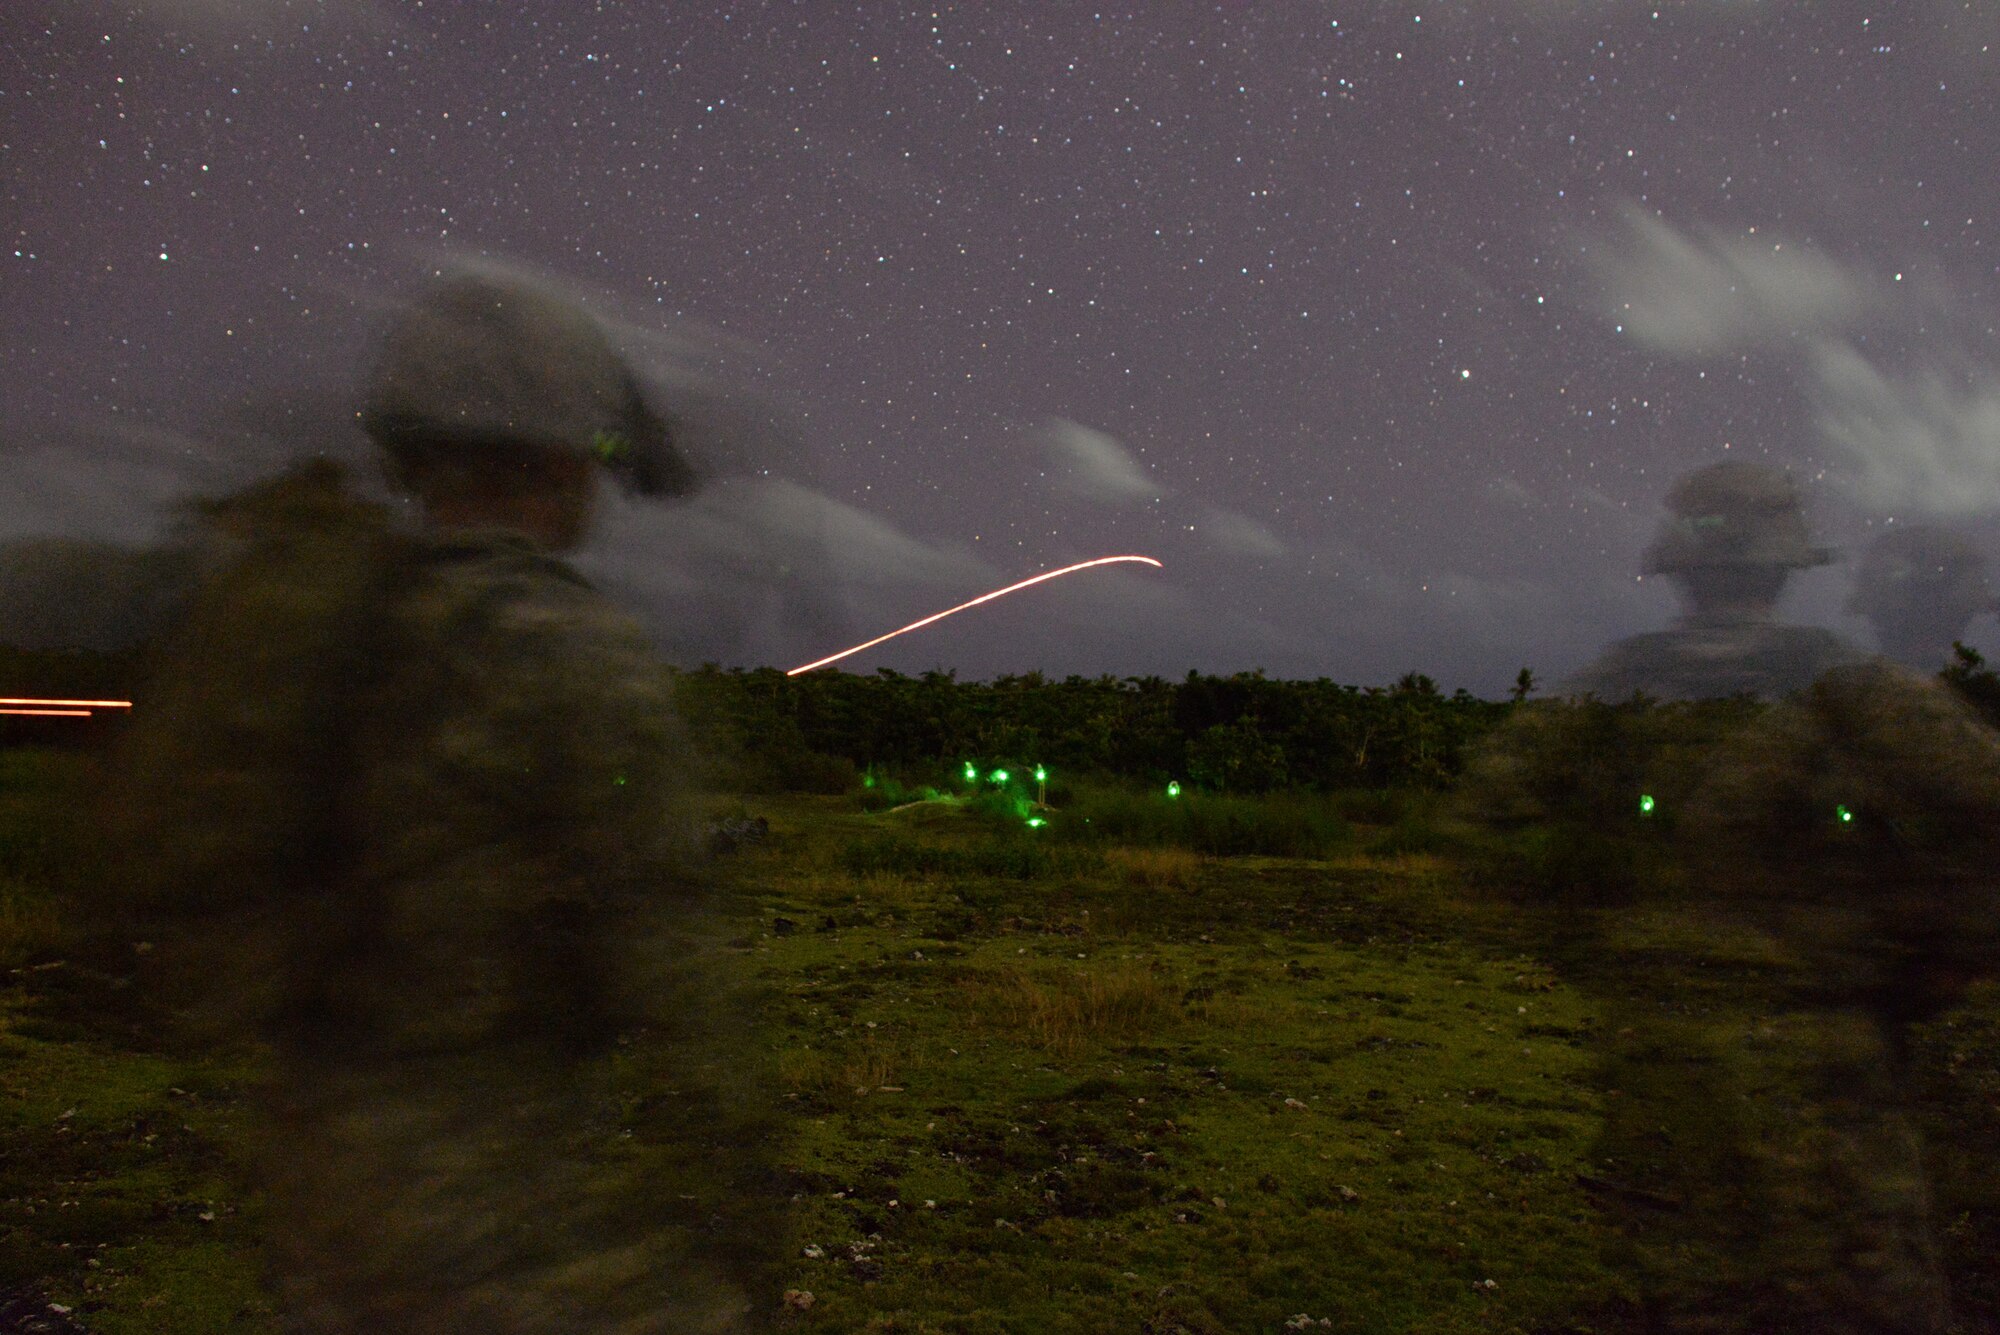 A U.S. Army squad from Alpha Company, 4th Battalion, 23rd Infantry Regiment, 2nd Stryker Brigade Combat Team, 2nd Infantry Division eliminates simulated targets during a night time squad live-fire exercise Nov. 18, 2016, at Andersen Air Force Base, Guam. After executing their objective during daylight hours, squads repeated the scenario using infrared lasers to mark their targets in the dark to gain experience working in low-light situations. (U.S. Air Force photo by Airman 1st Class Jacob Skovo)